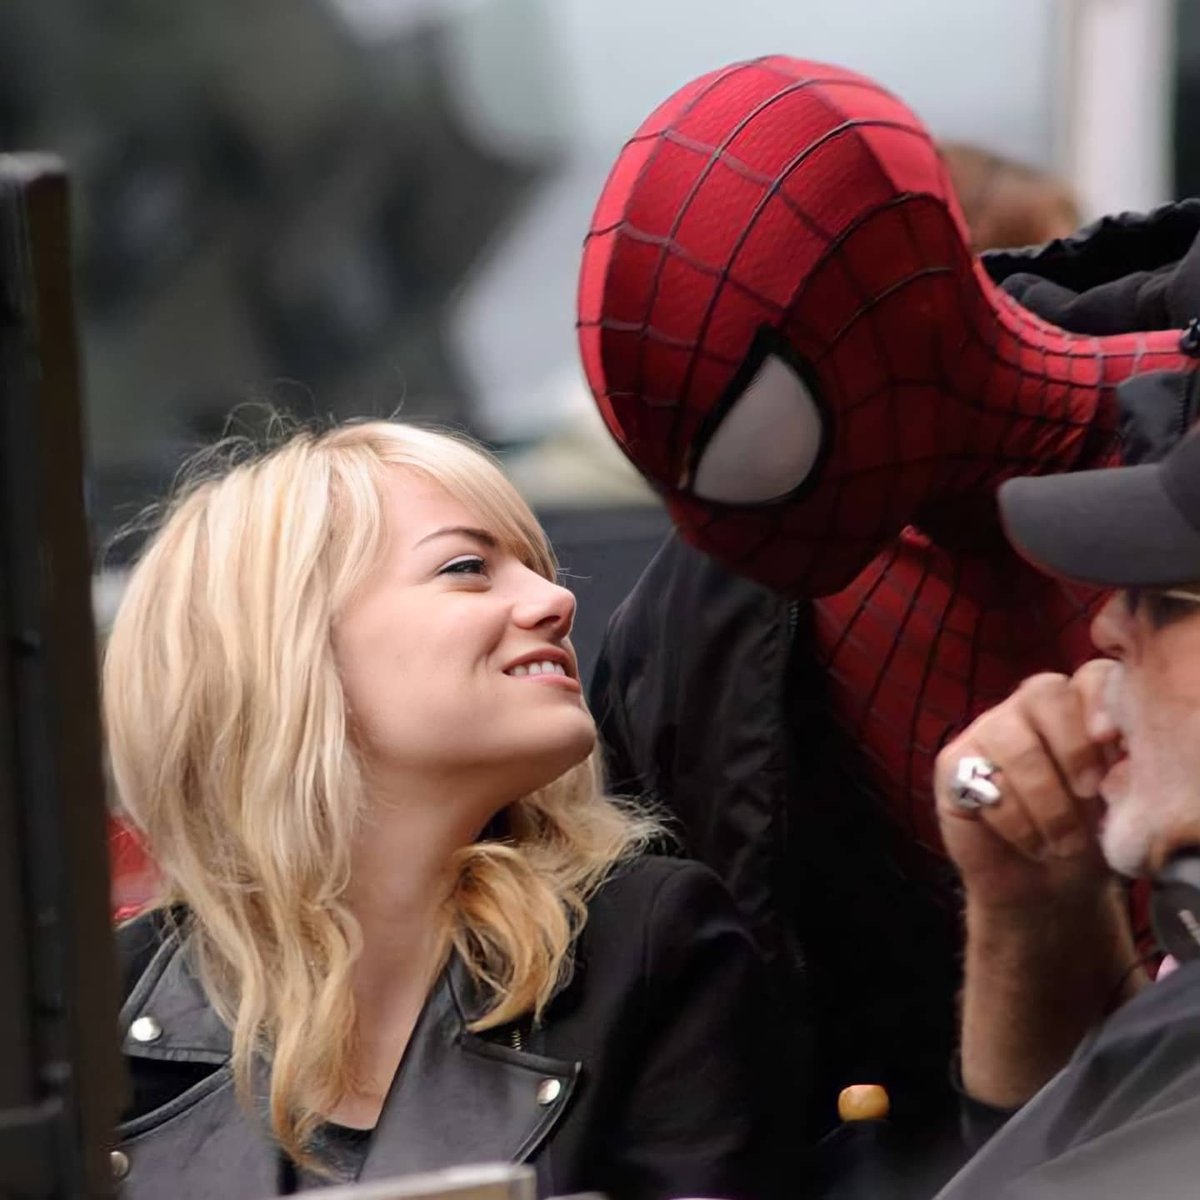 RT @Shots_SpiderMan: Emma Stone kissing Andrew Garfield on the set of The Amazing Spider-Man 2 (2014) https://t.co/oI2b51E8iY